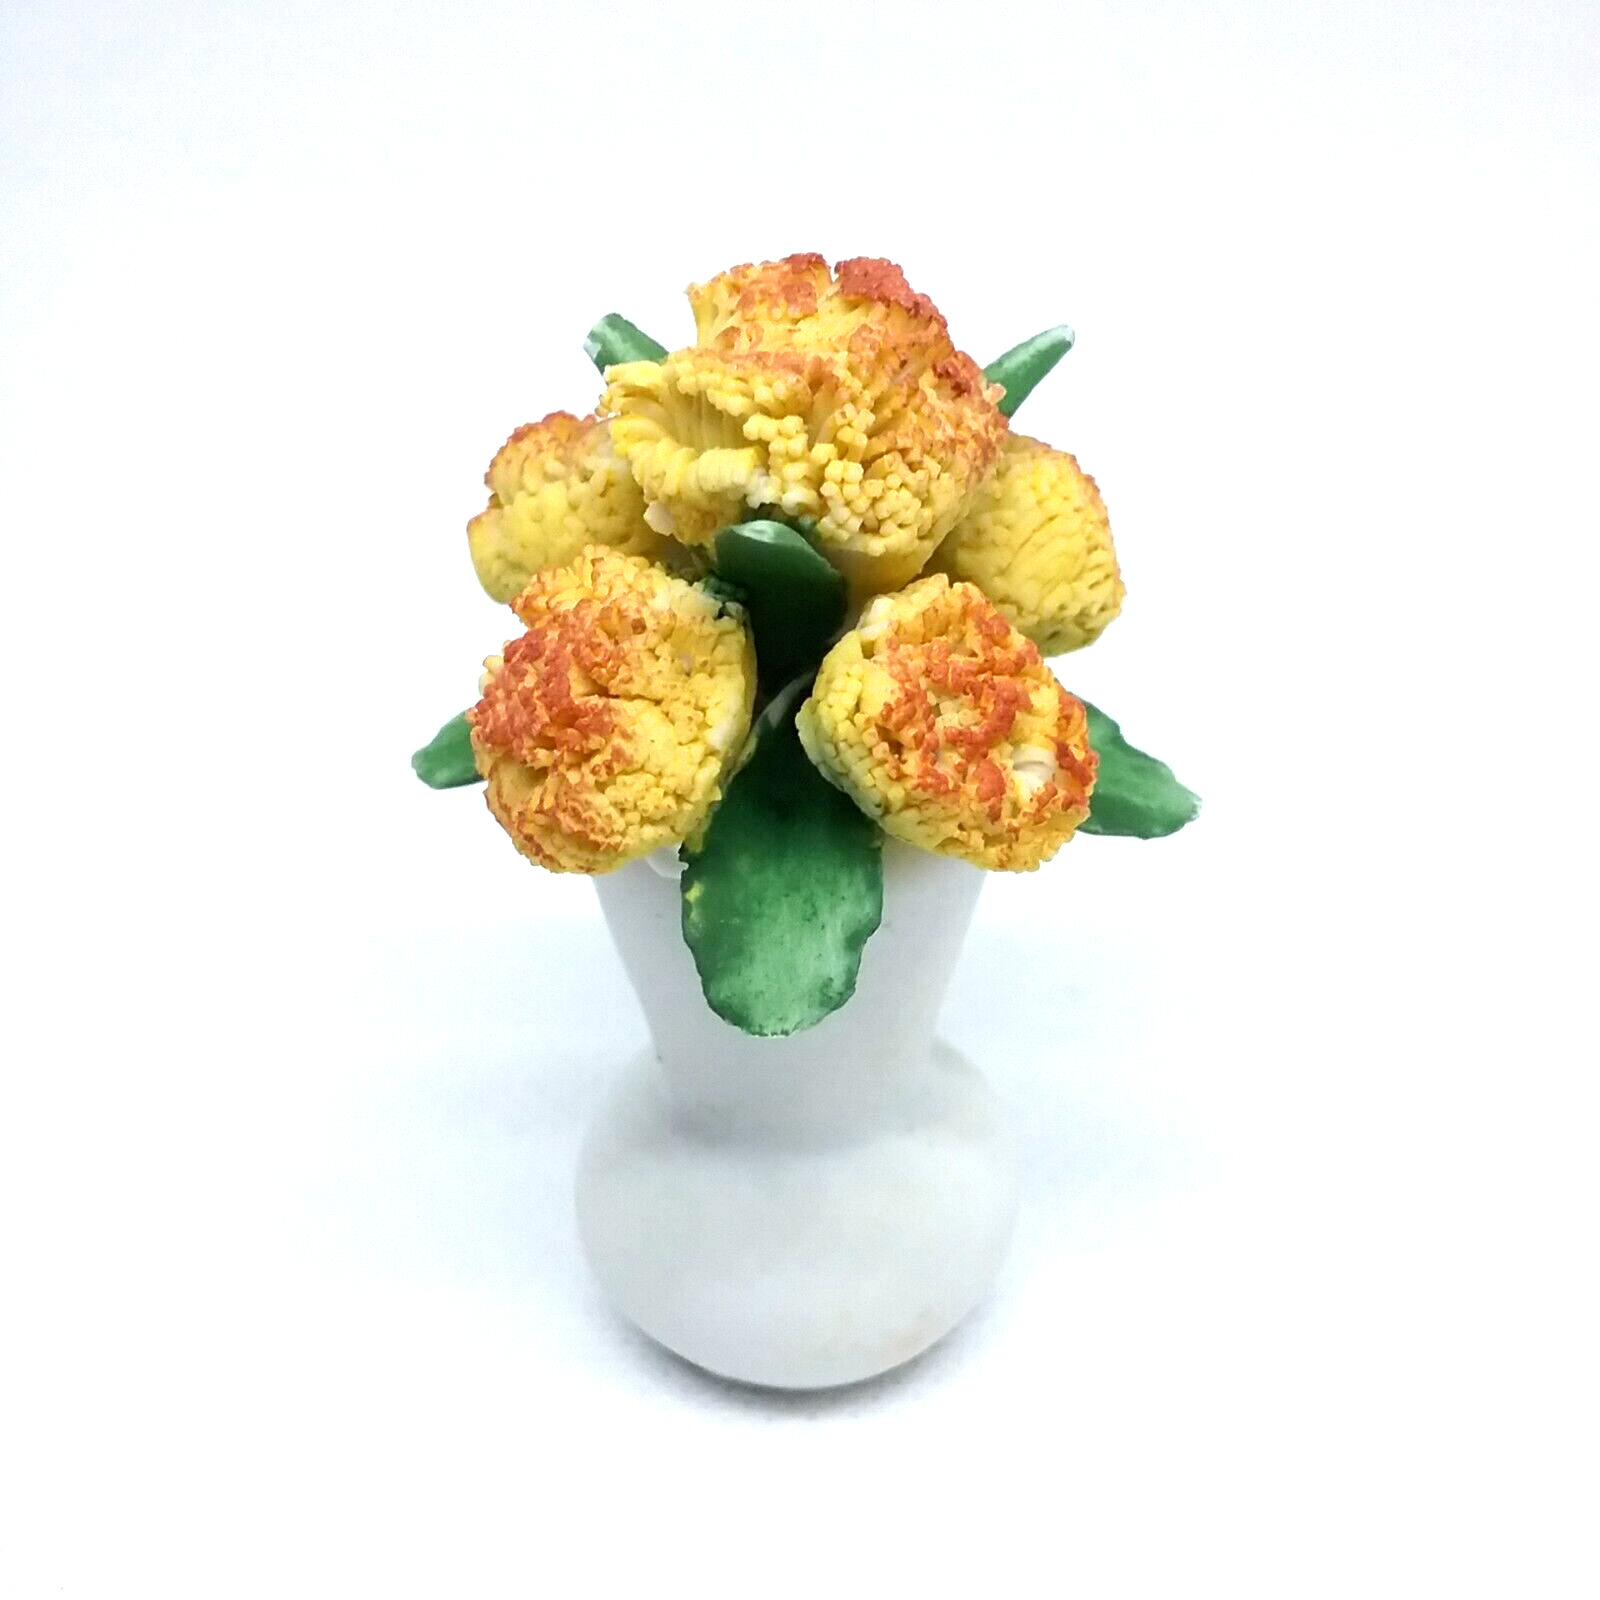 Flower of the year 81FP Miniature Hand Painted Yellow Flowers Porcelain Vase